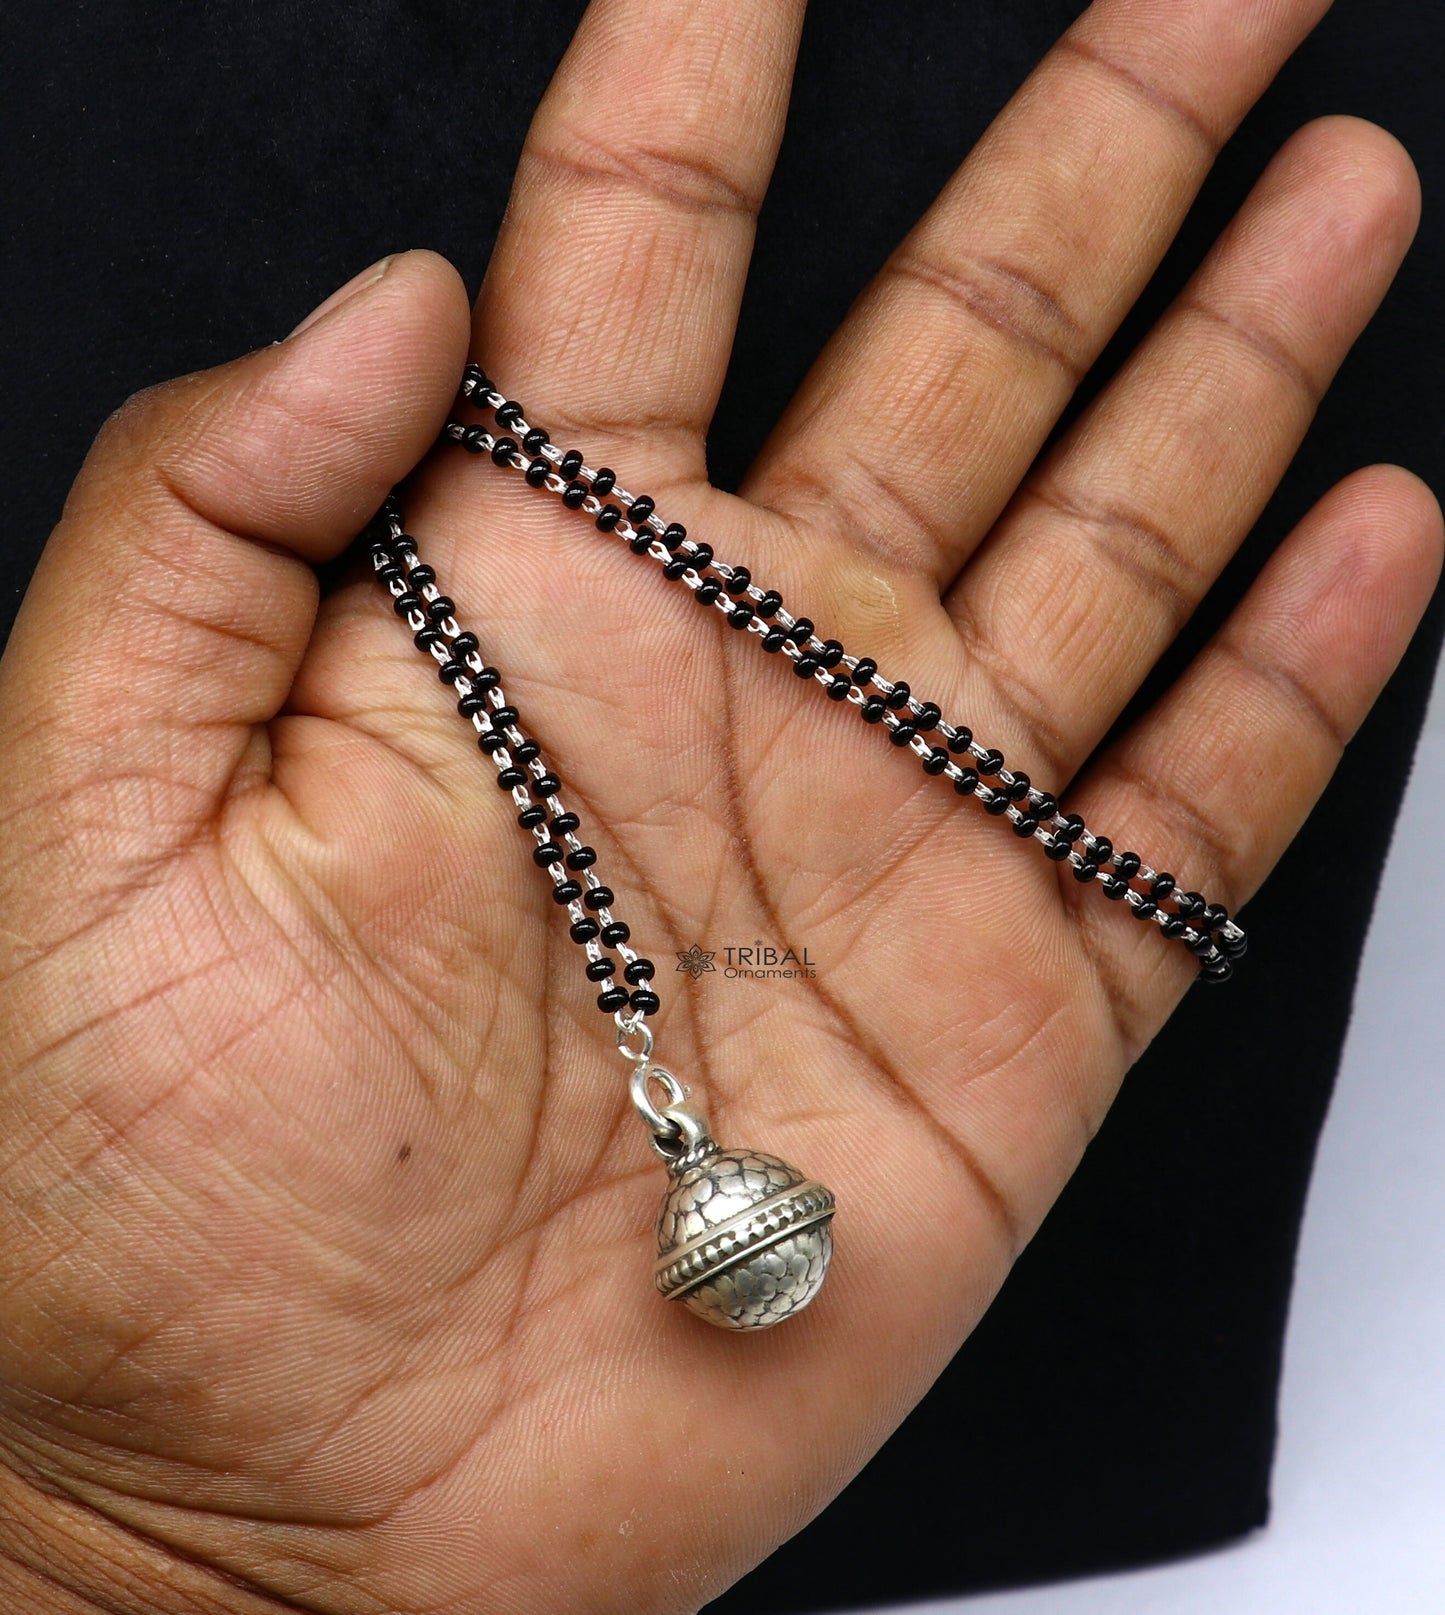 16" to 26" traditional cultural black beads 925 sterling silver stylish Single ball pendant necklace modern trendy delicate jewelry set625 - TRIBAL ORNAMENTS